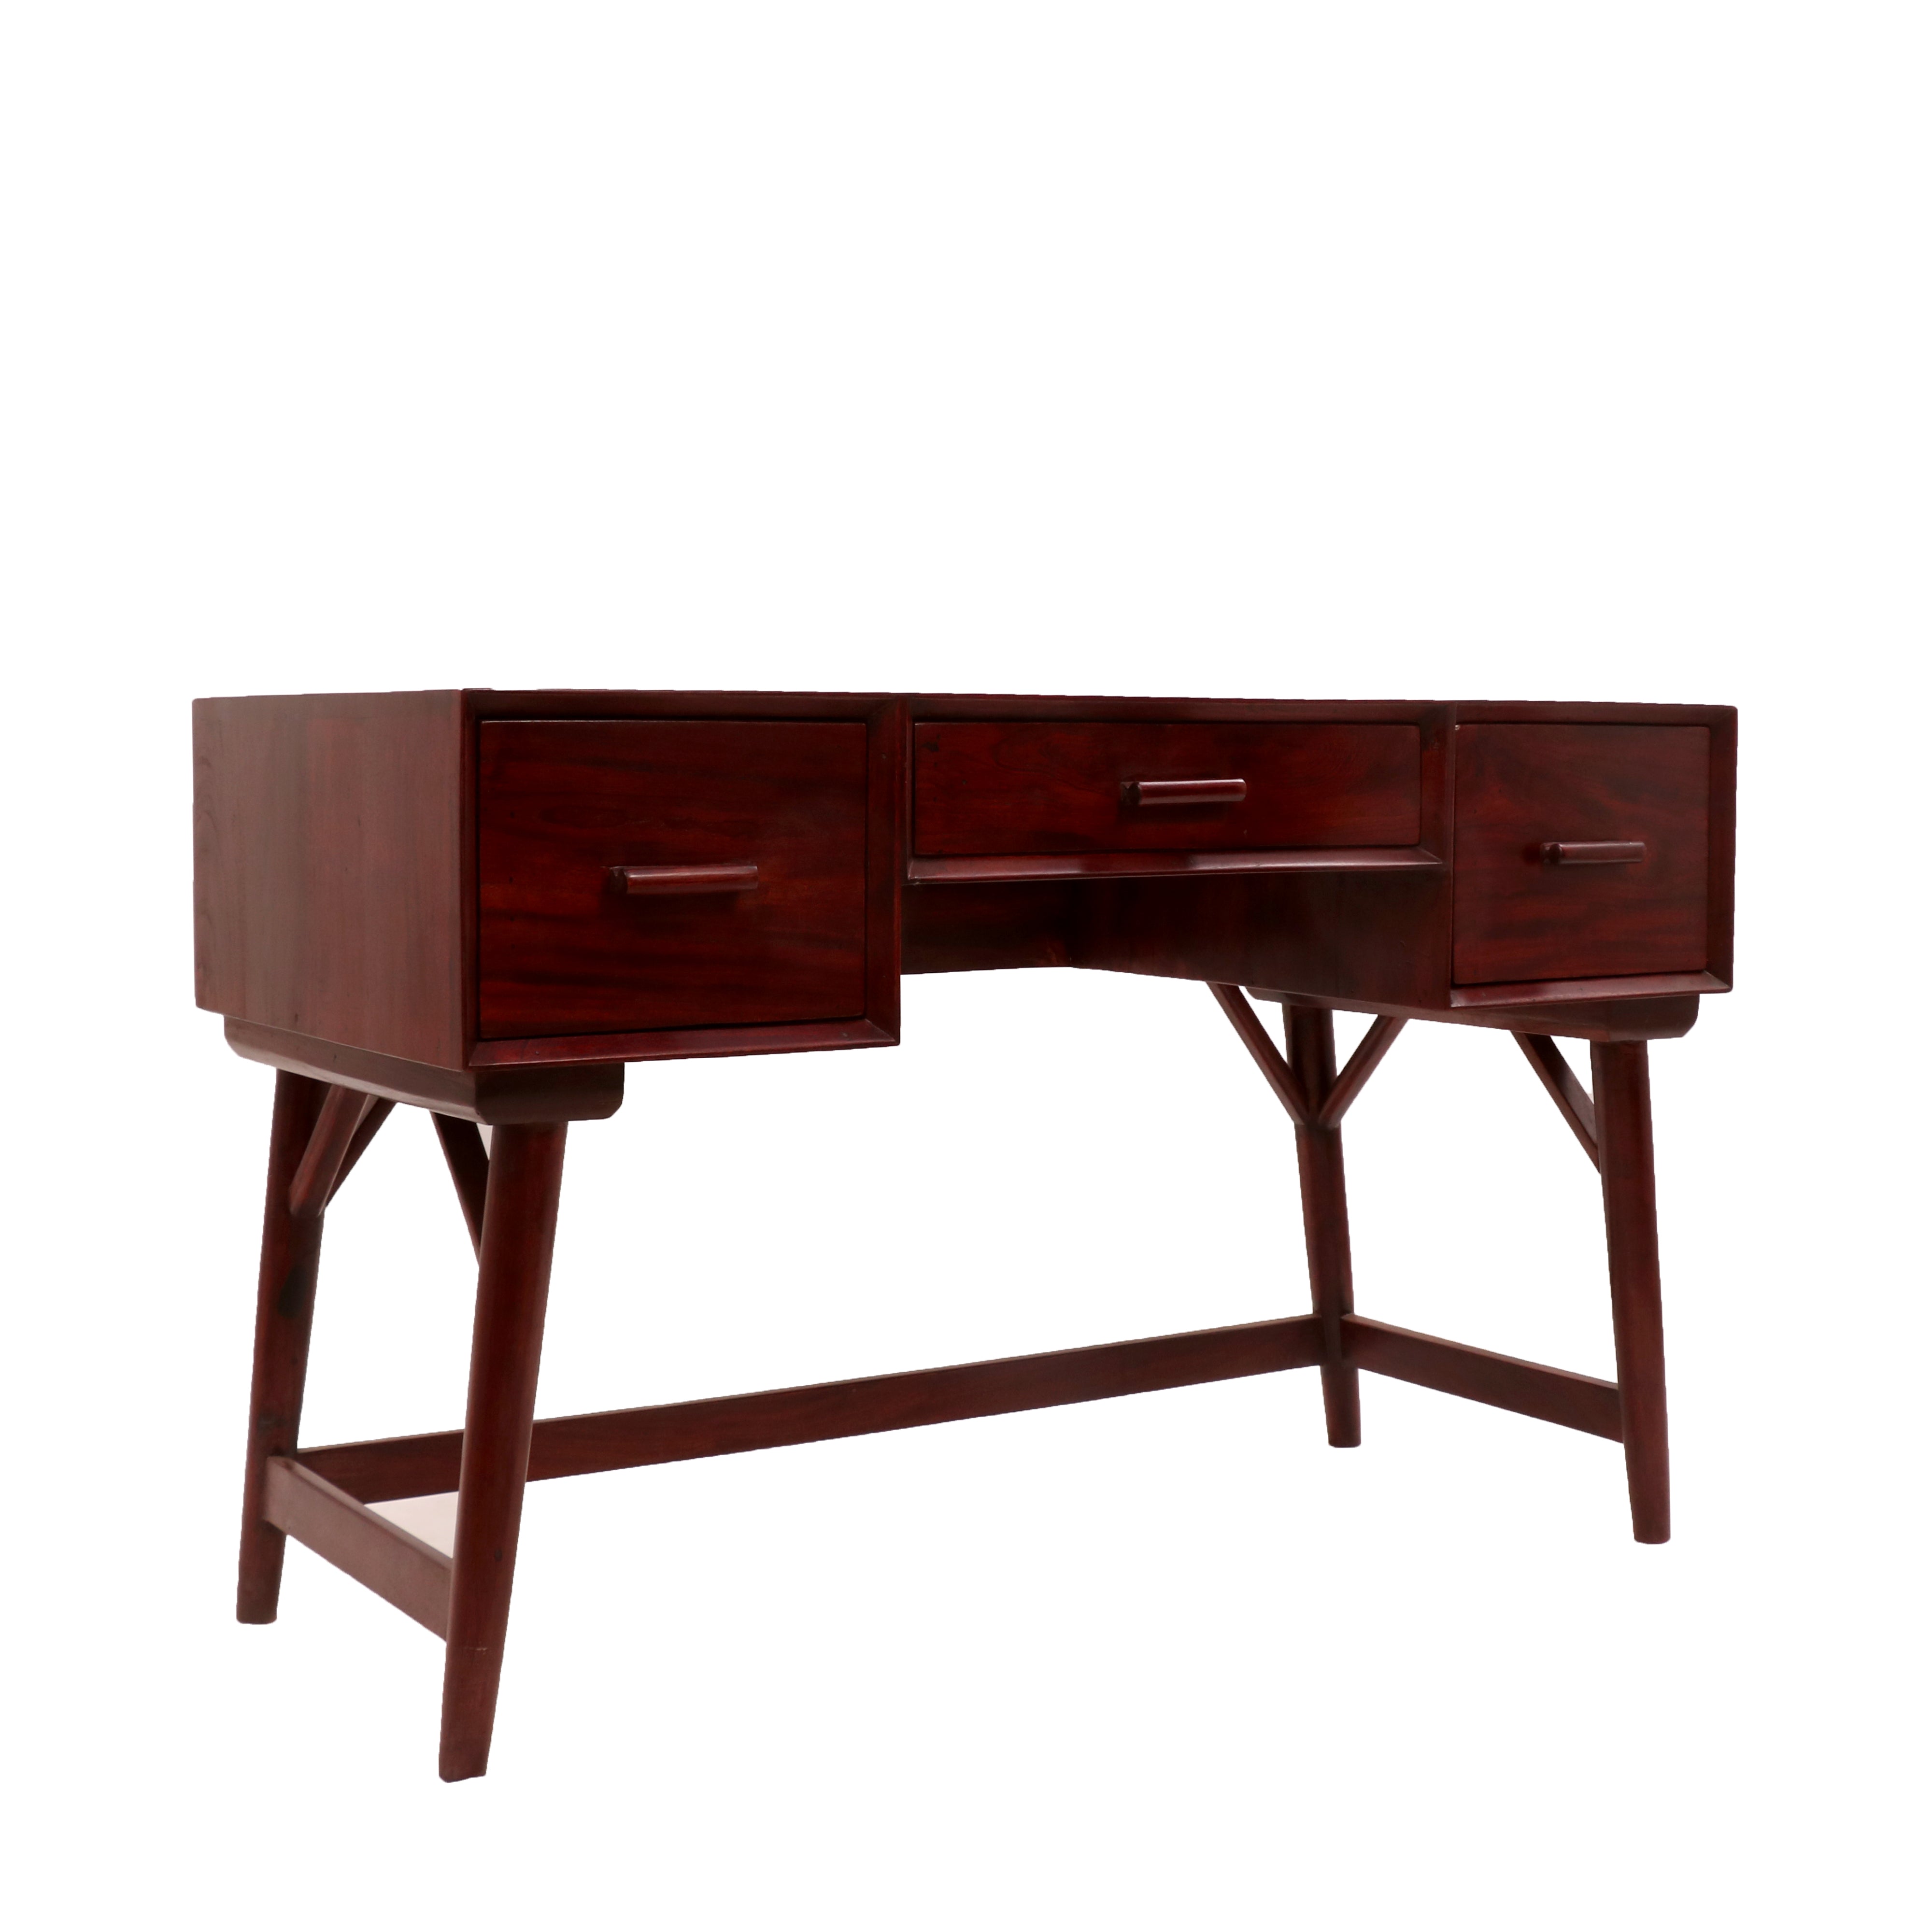 Rustic Heritage Wooden Desk Study Table